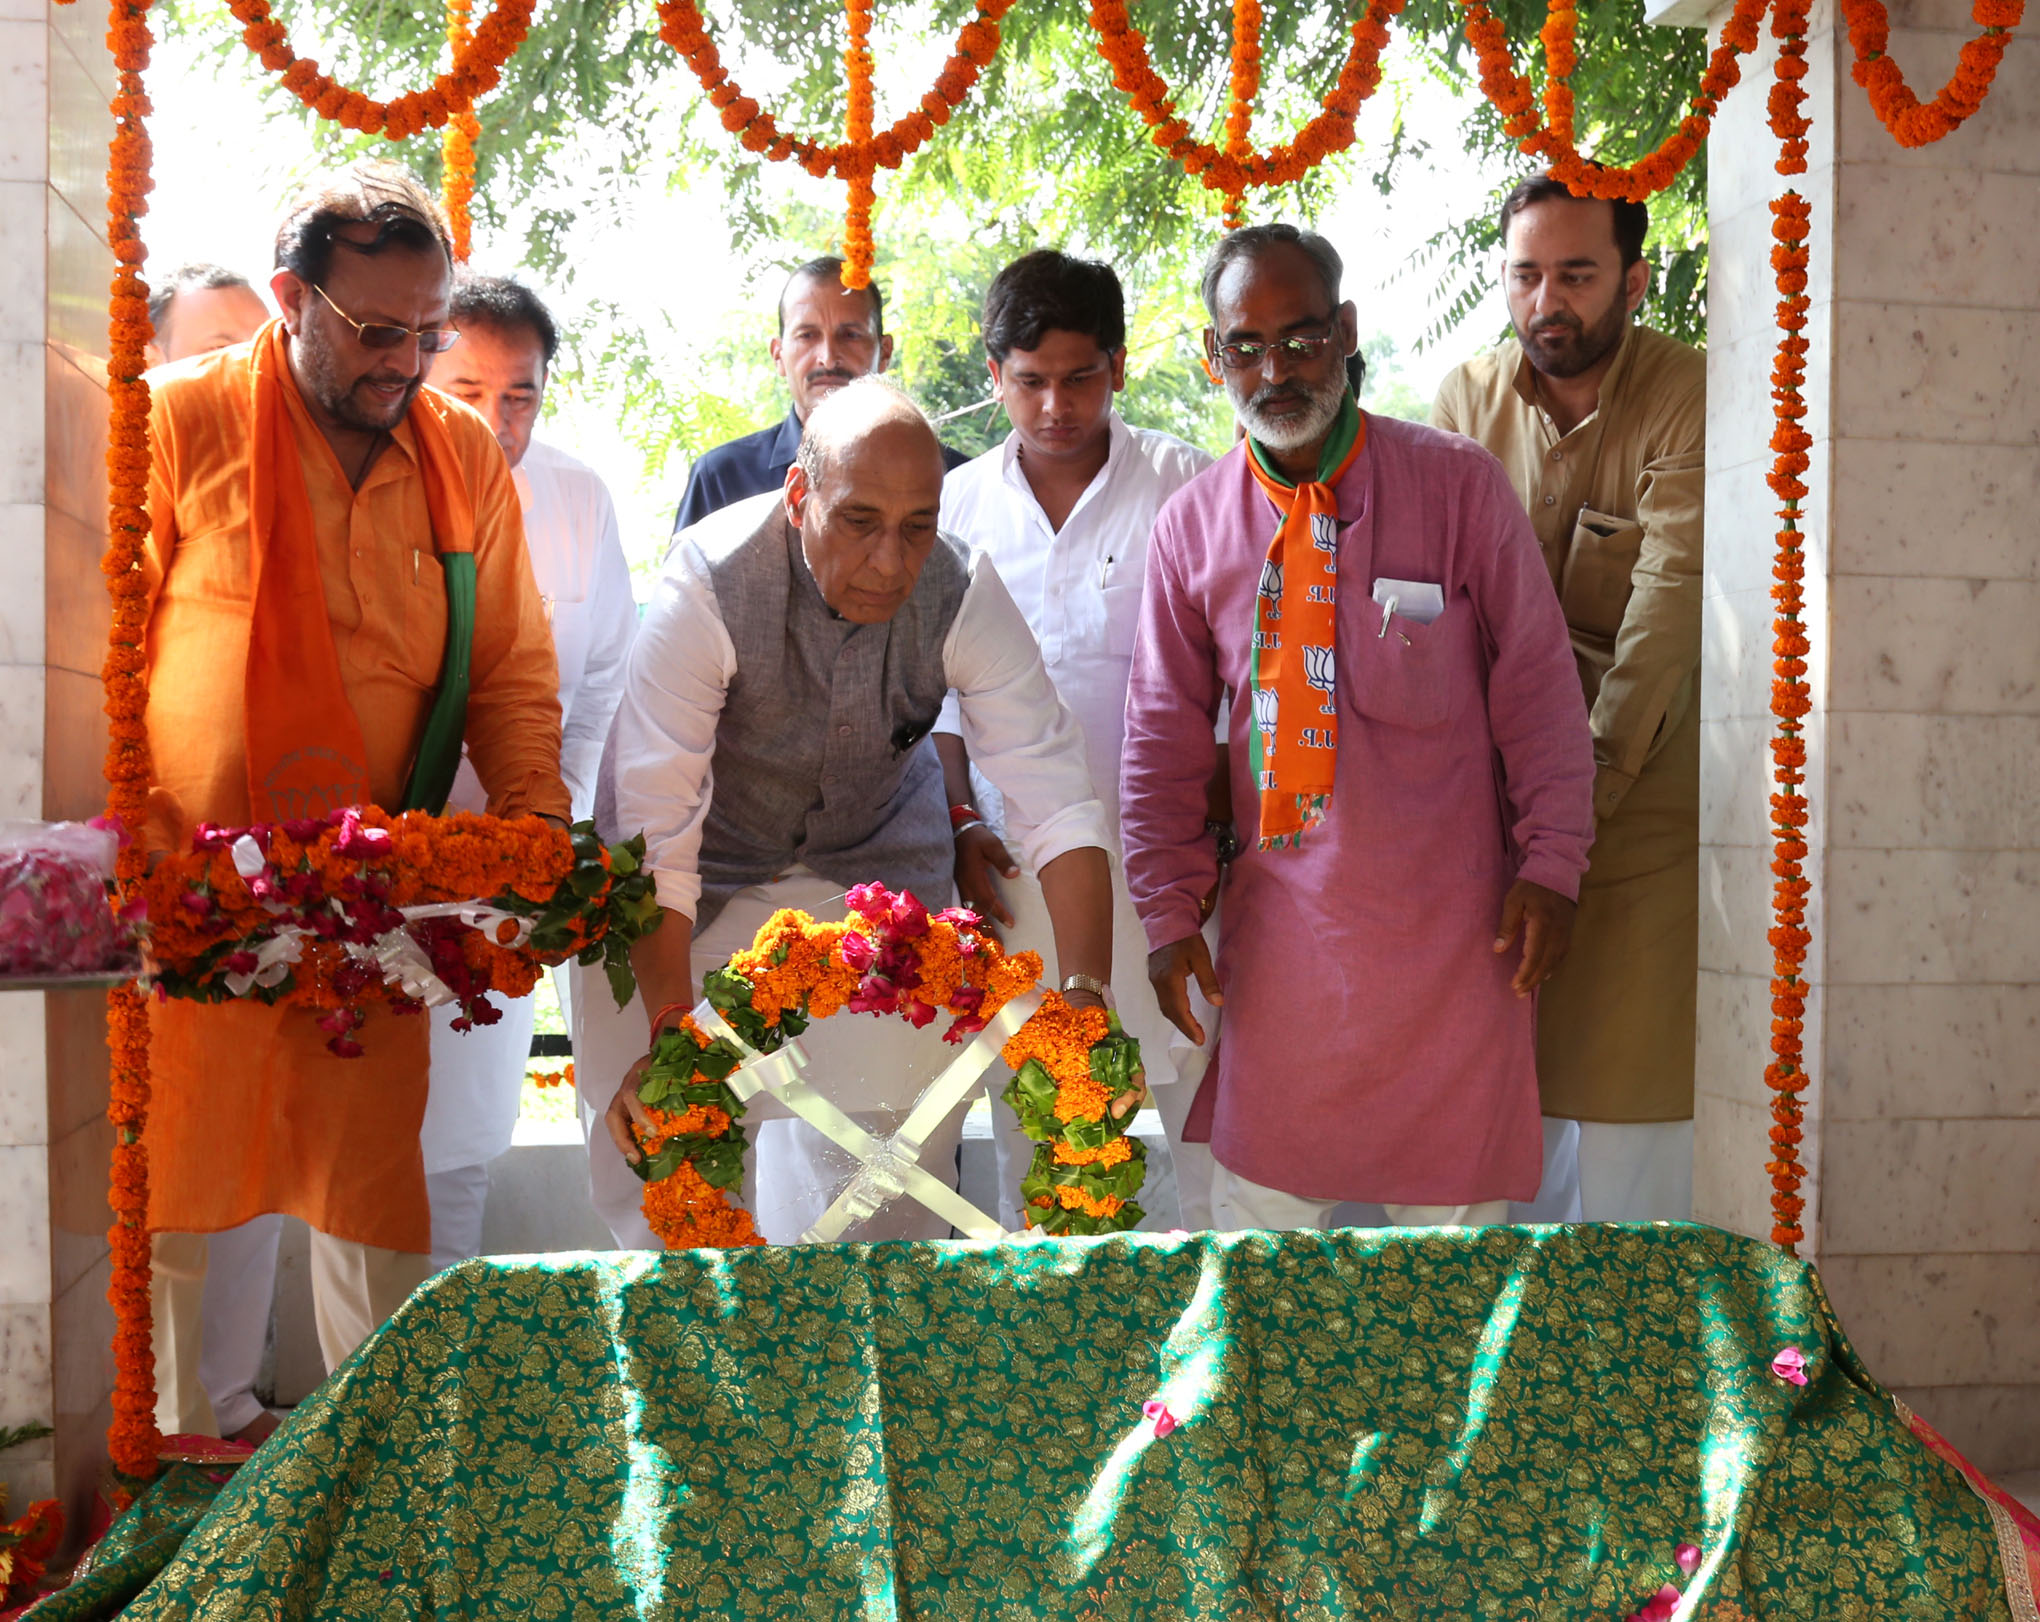 The Union Home Minister, Shri Rajnath Singh paying tributes at the tomb of freedom fighter and martyr Ashfaqullah Khan, at Shahjahanpur, Uttar Pradesh on August 20, 2016.